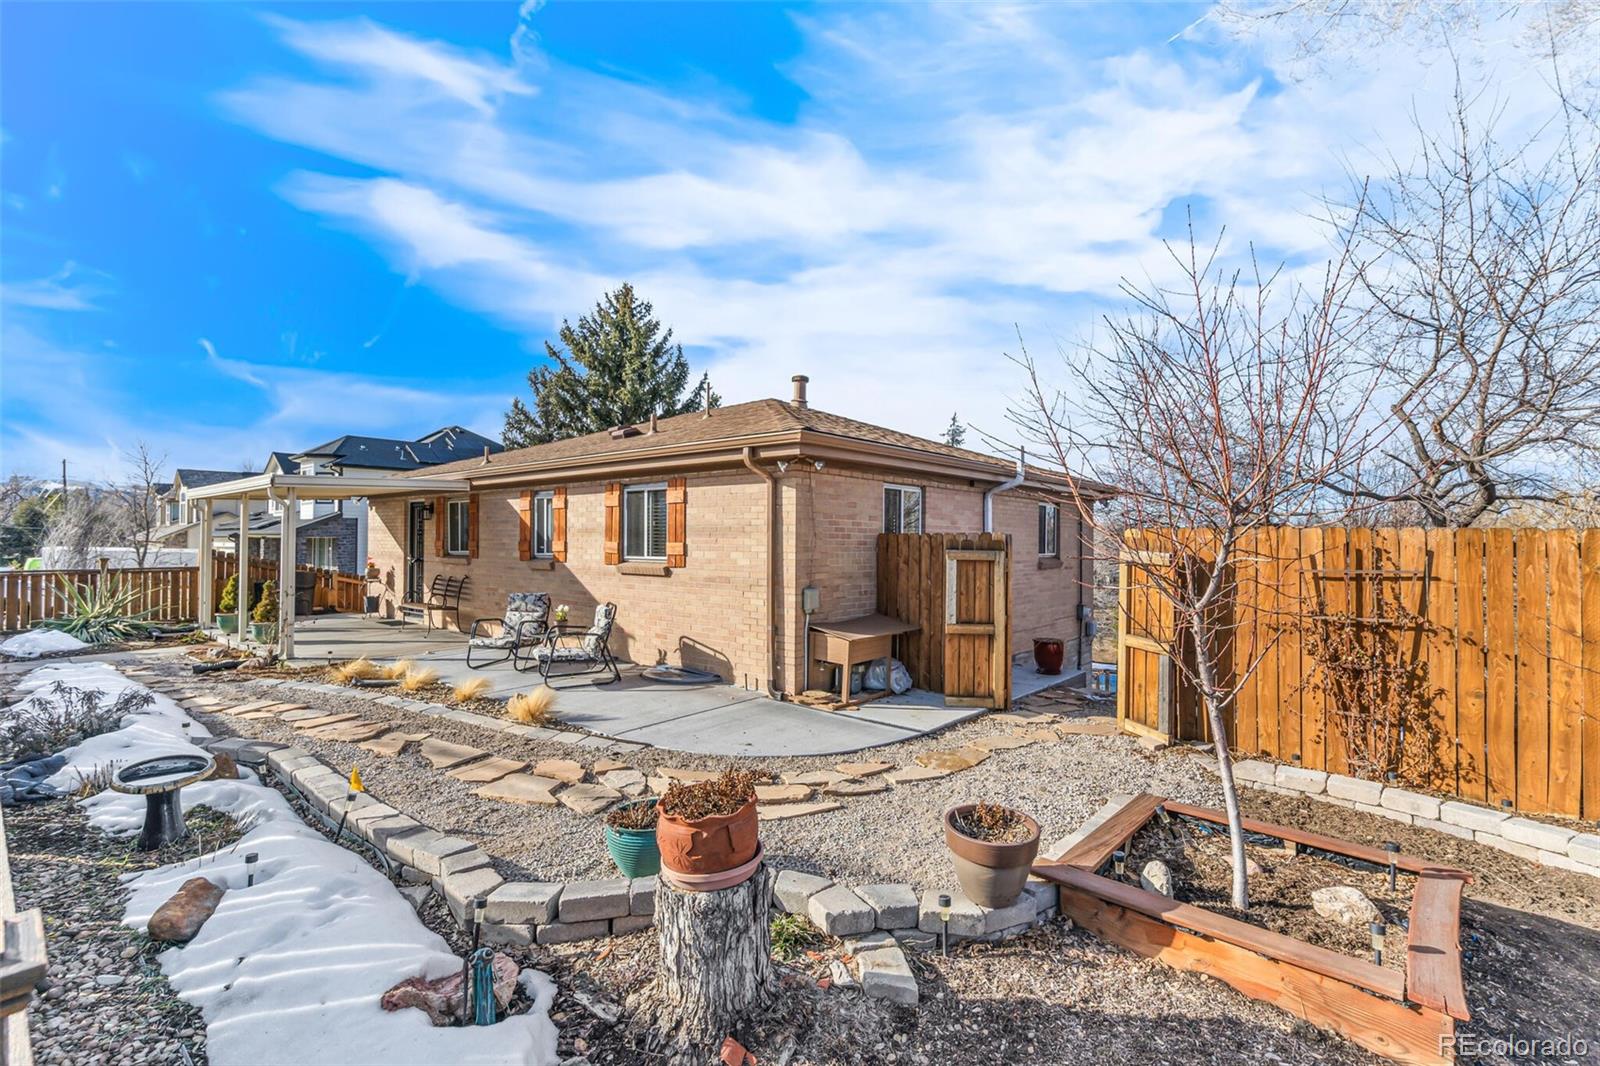 Report Image for 8835 W Mississippi Avenue,Lakewood, Colorado